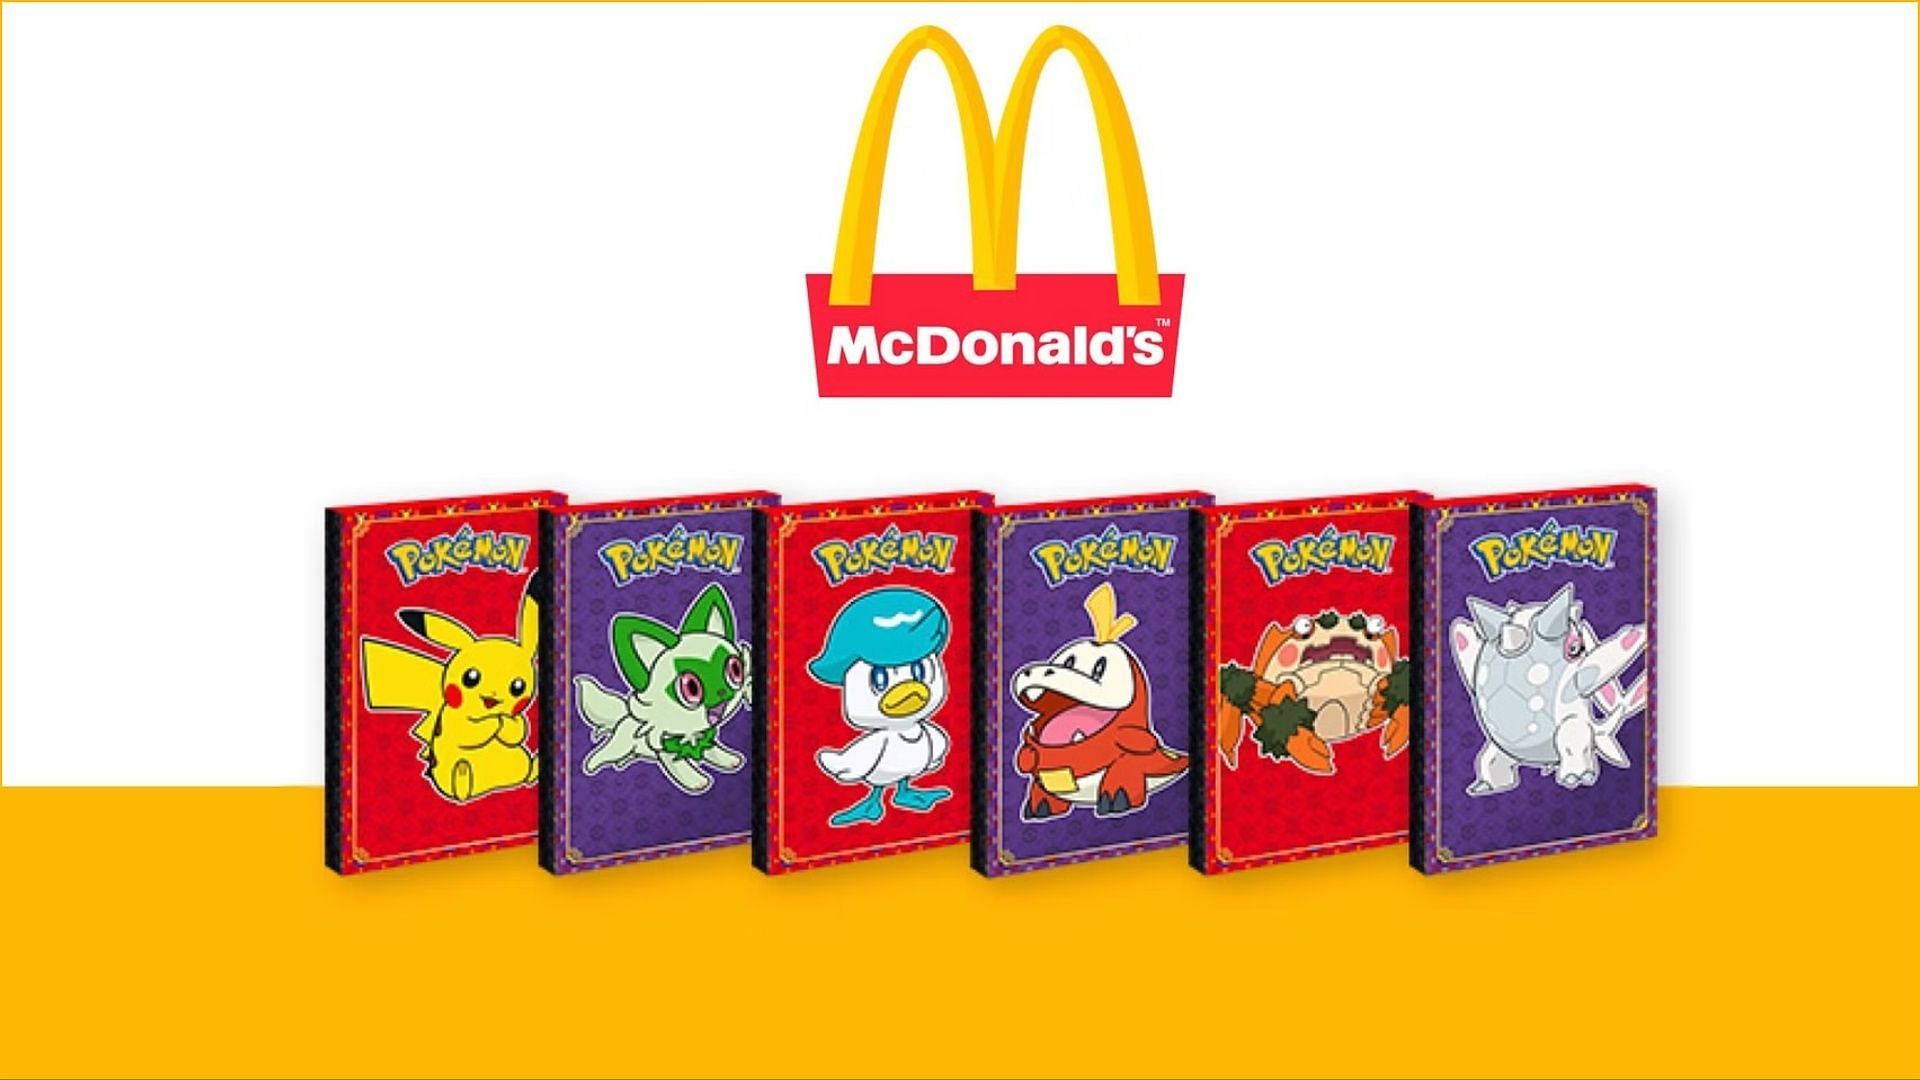 what is the rarest card in McDonalds pokemon｜TikTok Search